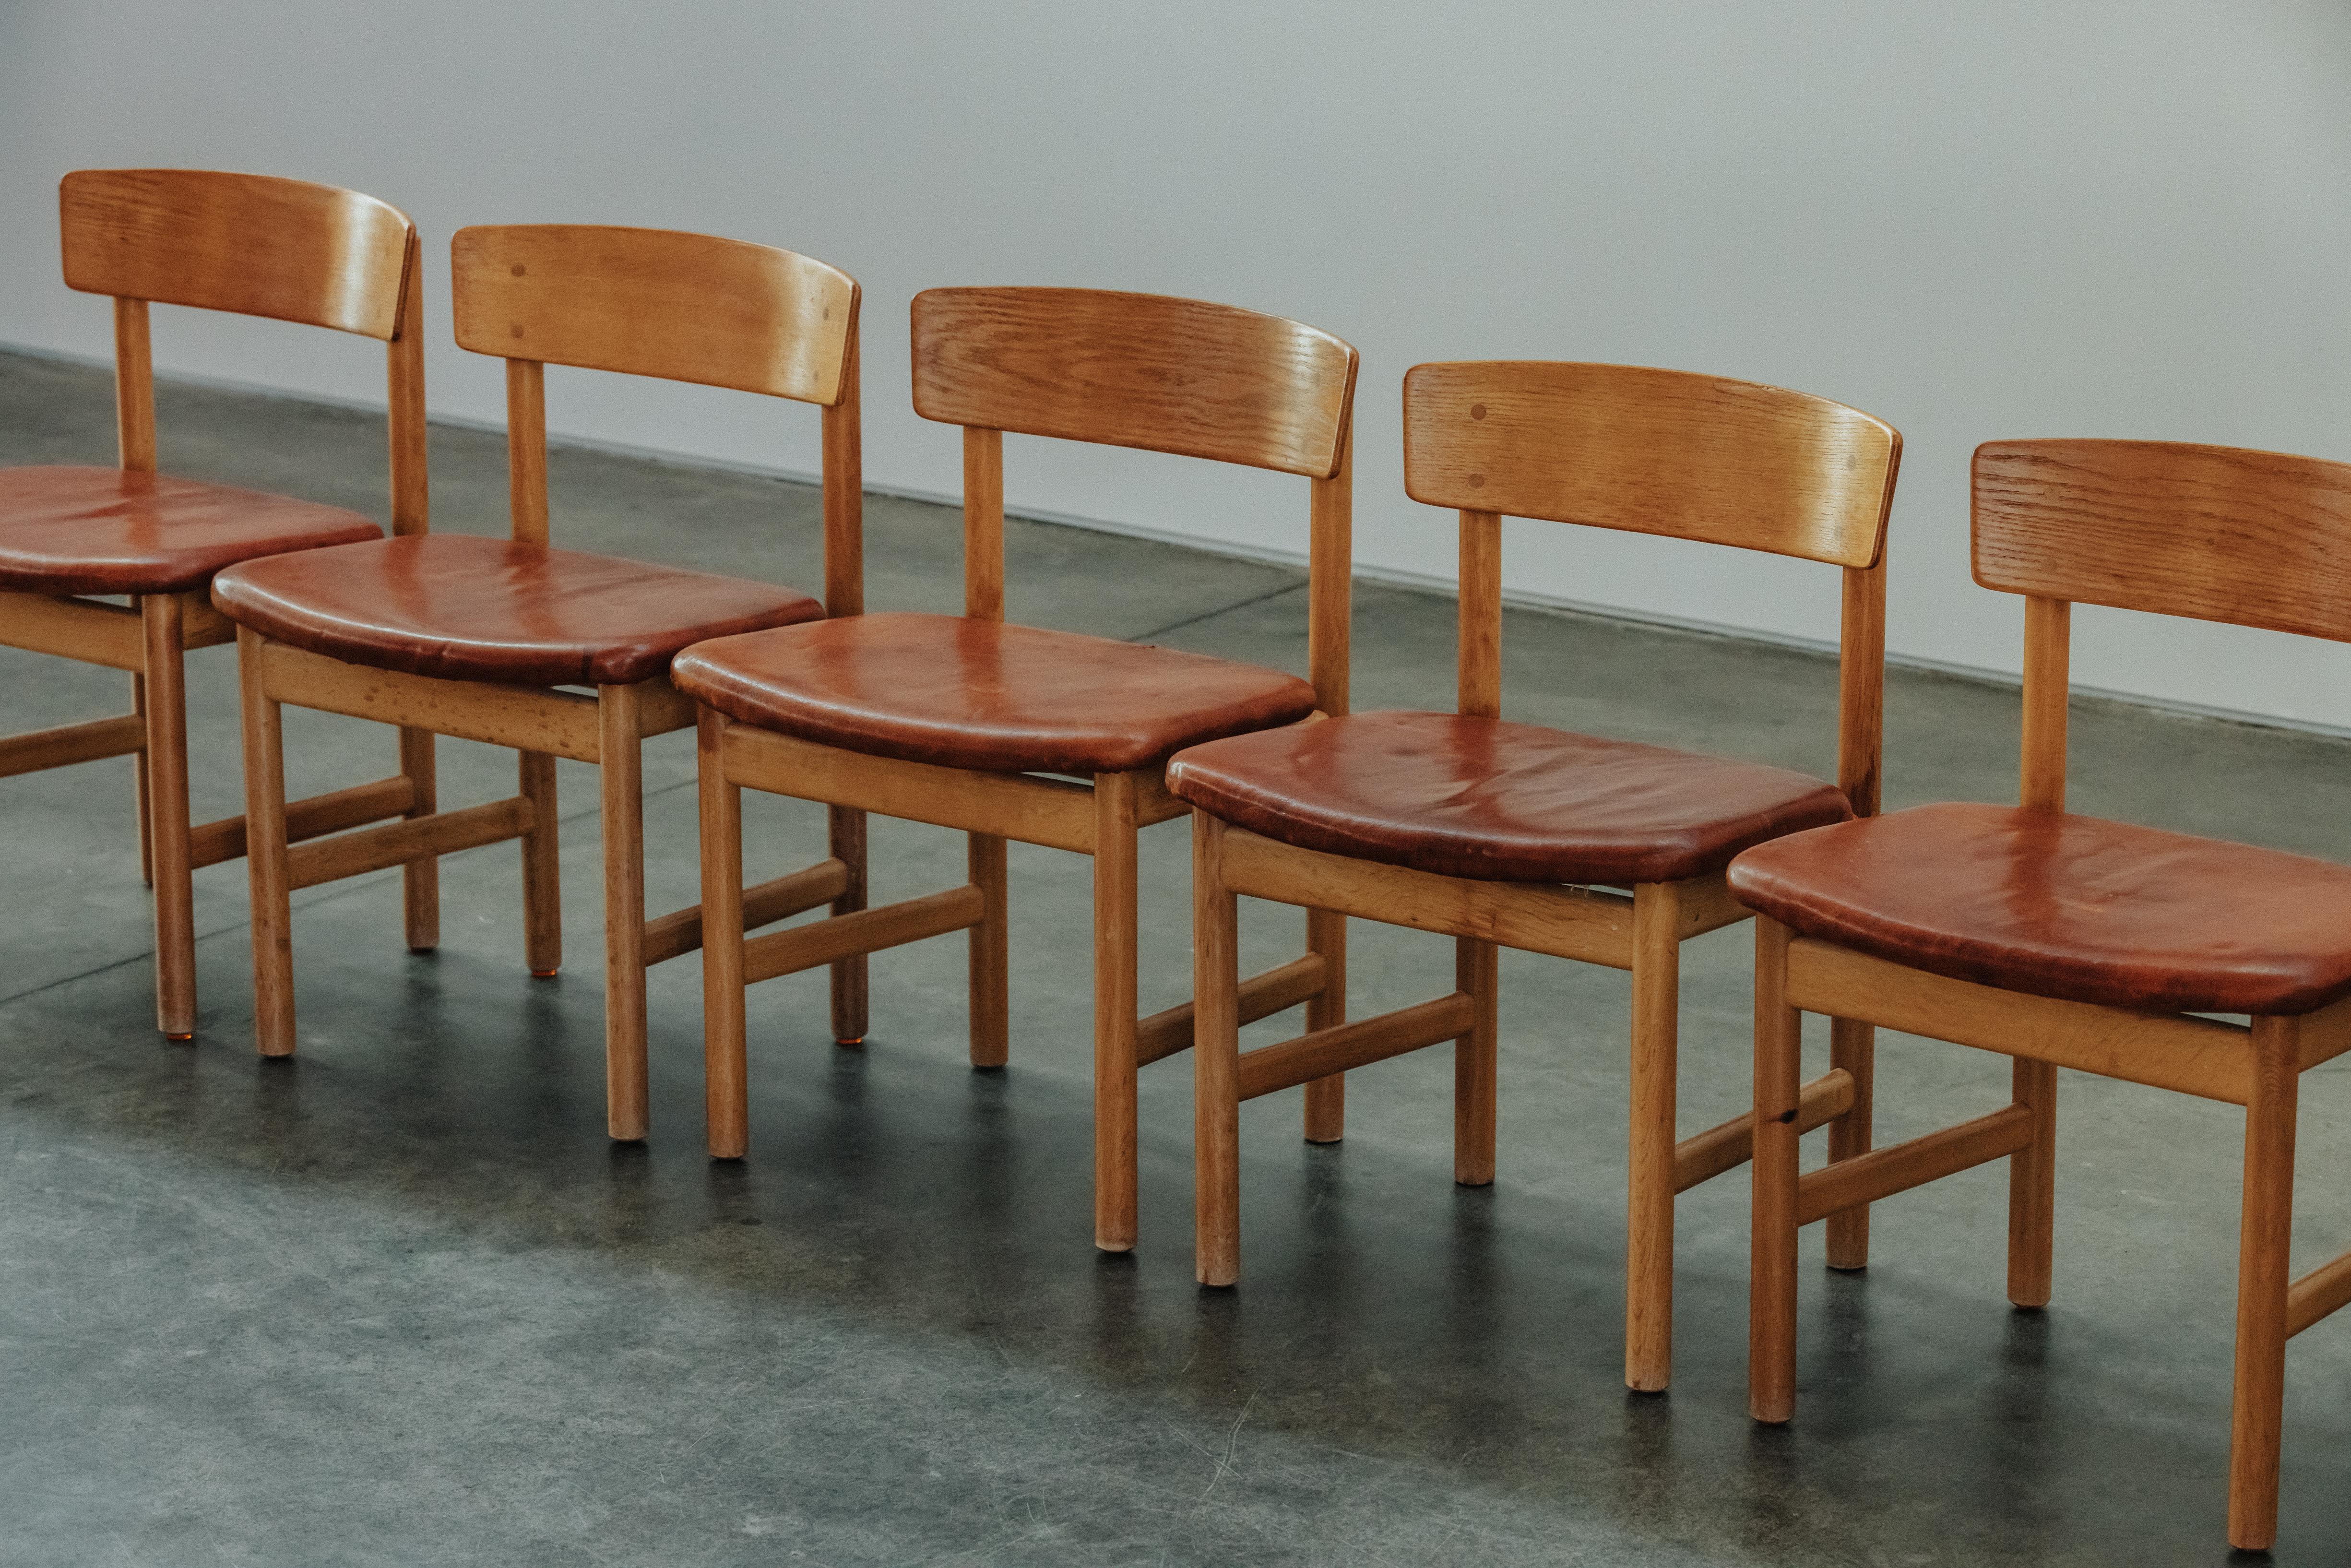 Vintage Set Of Borge Mogensen Dining Chairs From Denmark, Circa 1970.  Oak from with original cognac leather seats.  Age related wear and use.